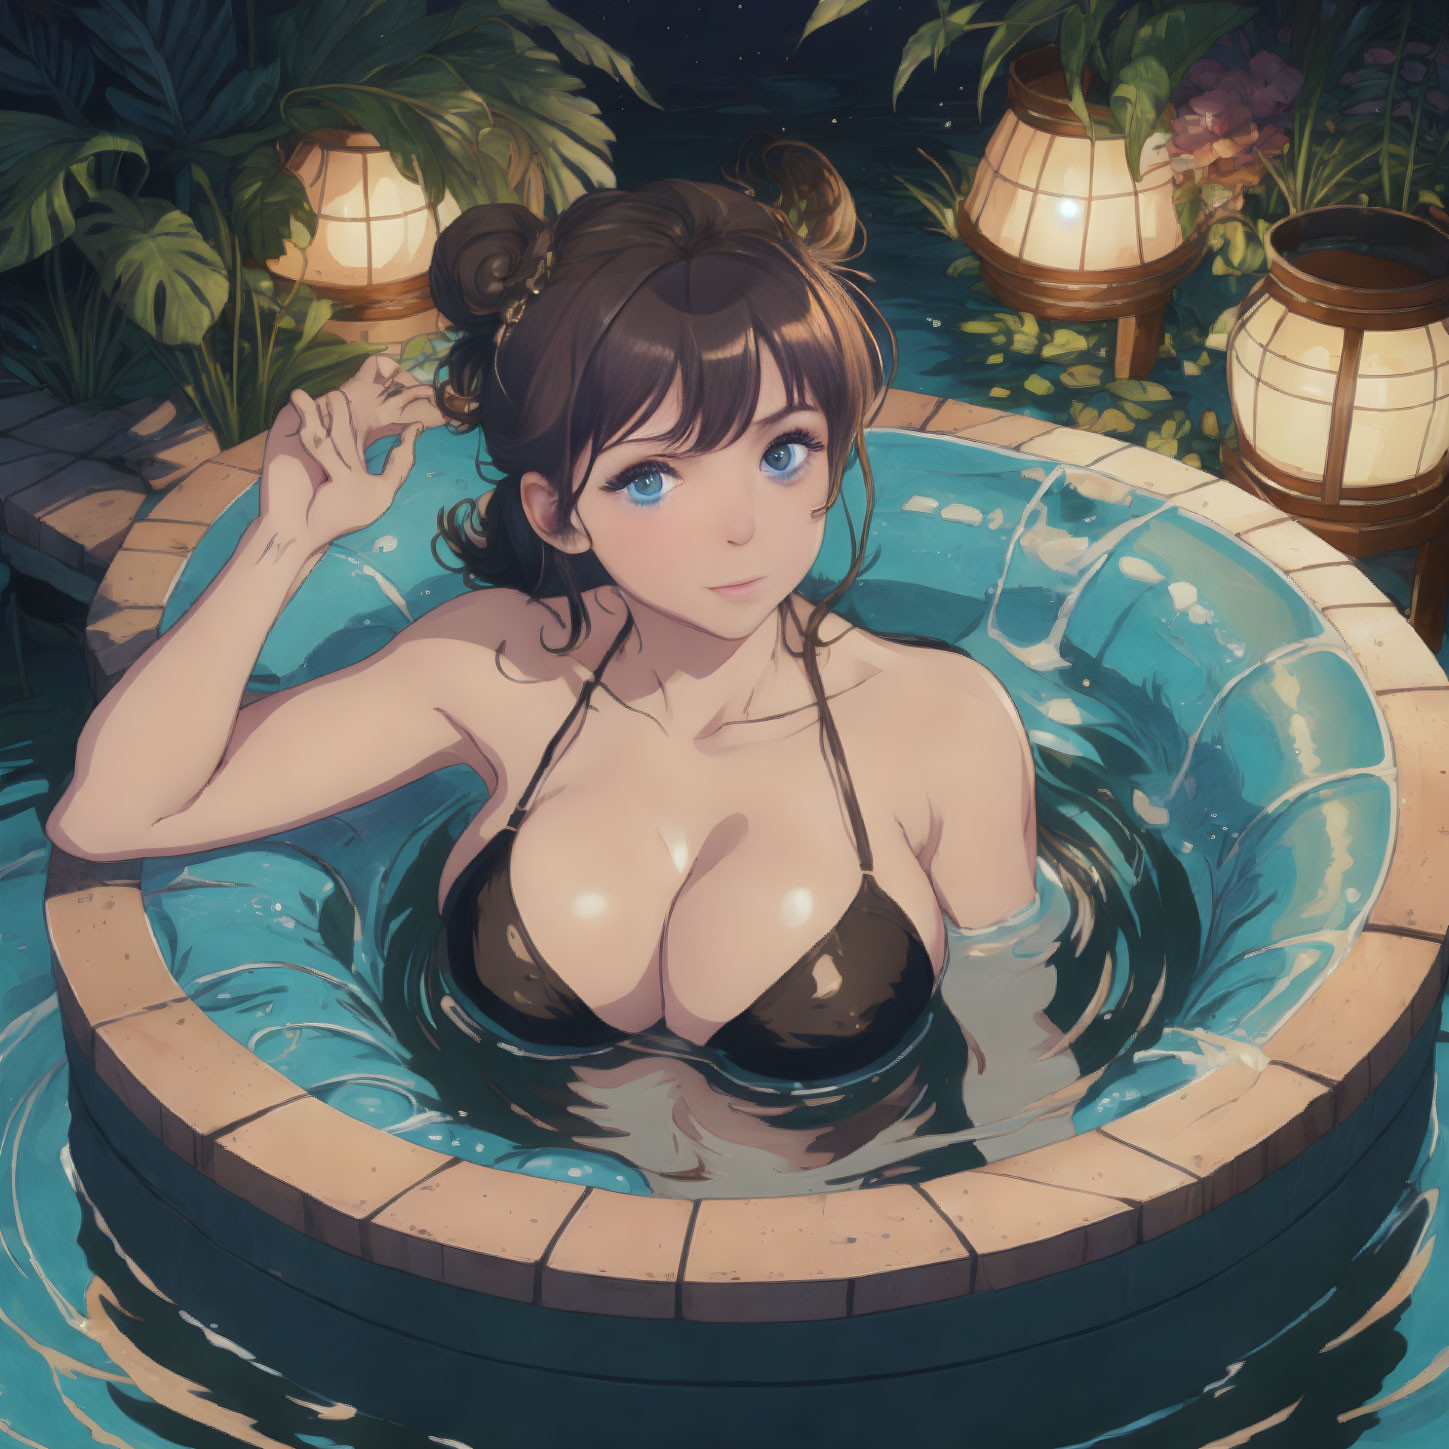 Brown-haired female anime character in twin buns relaxing in hot tub at night with lanterns.